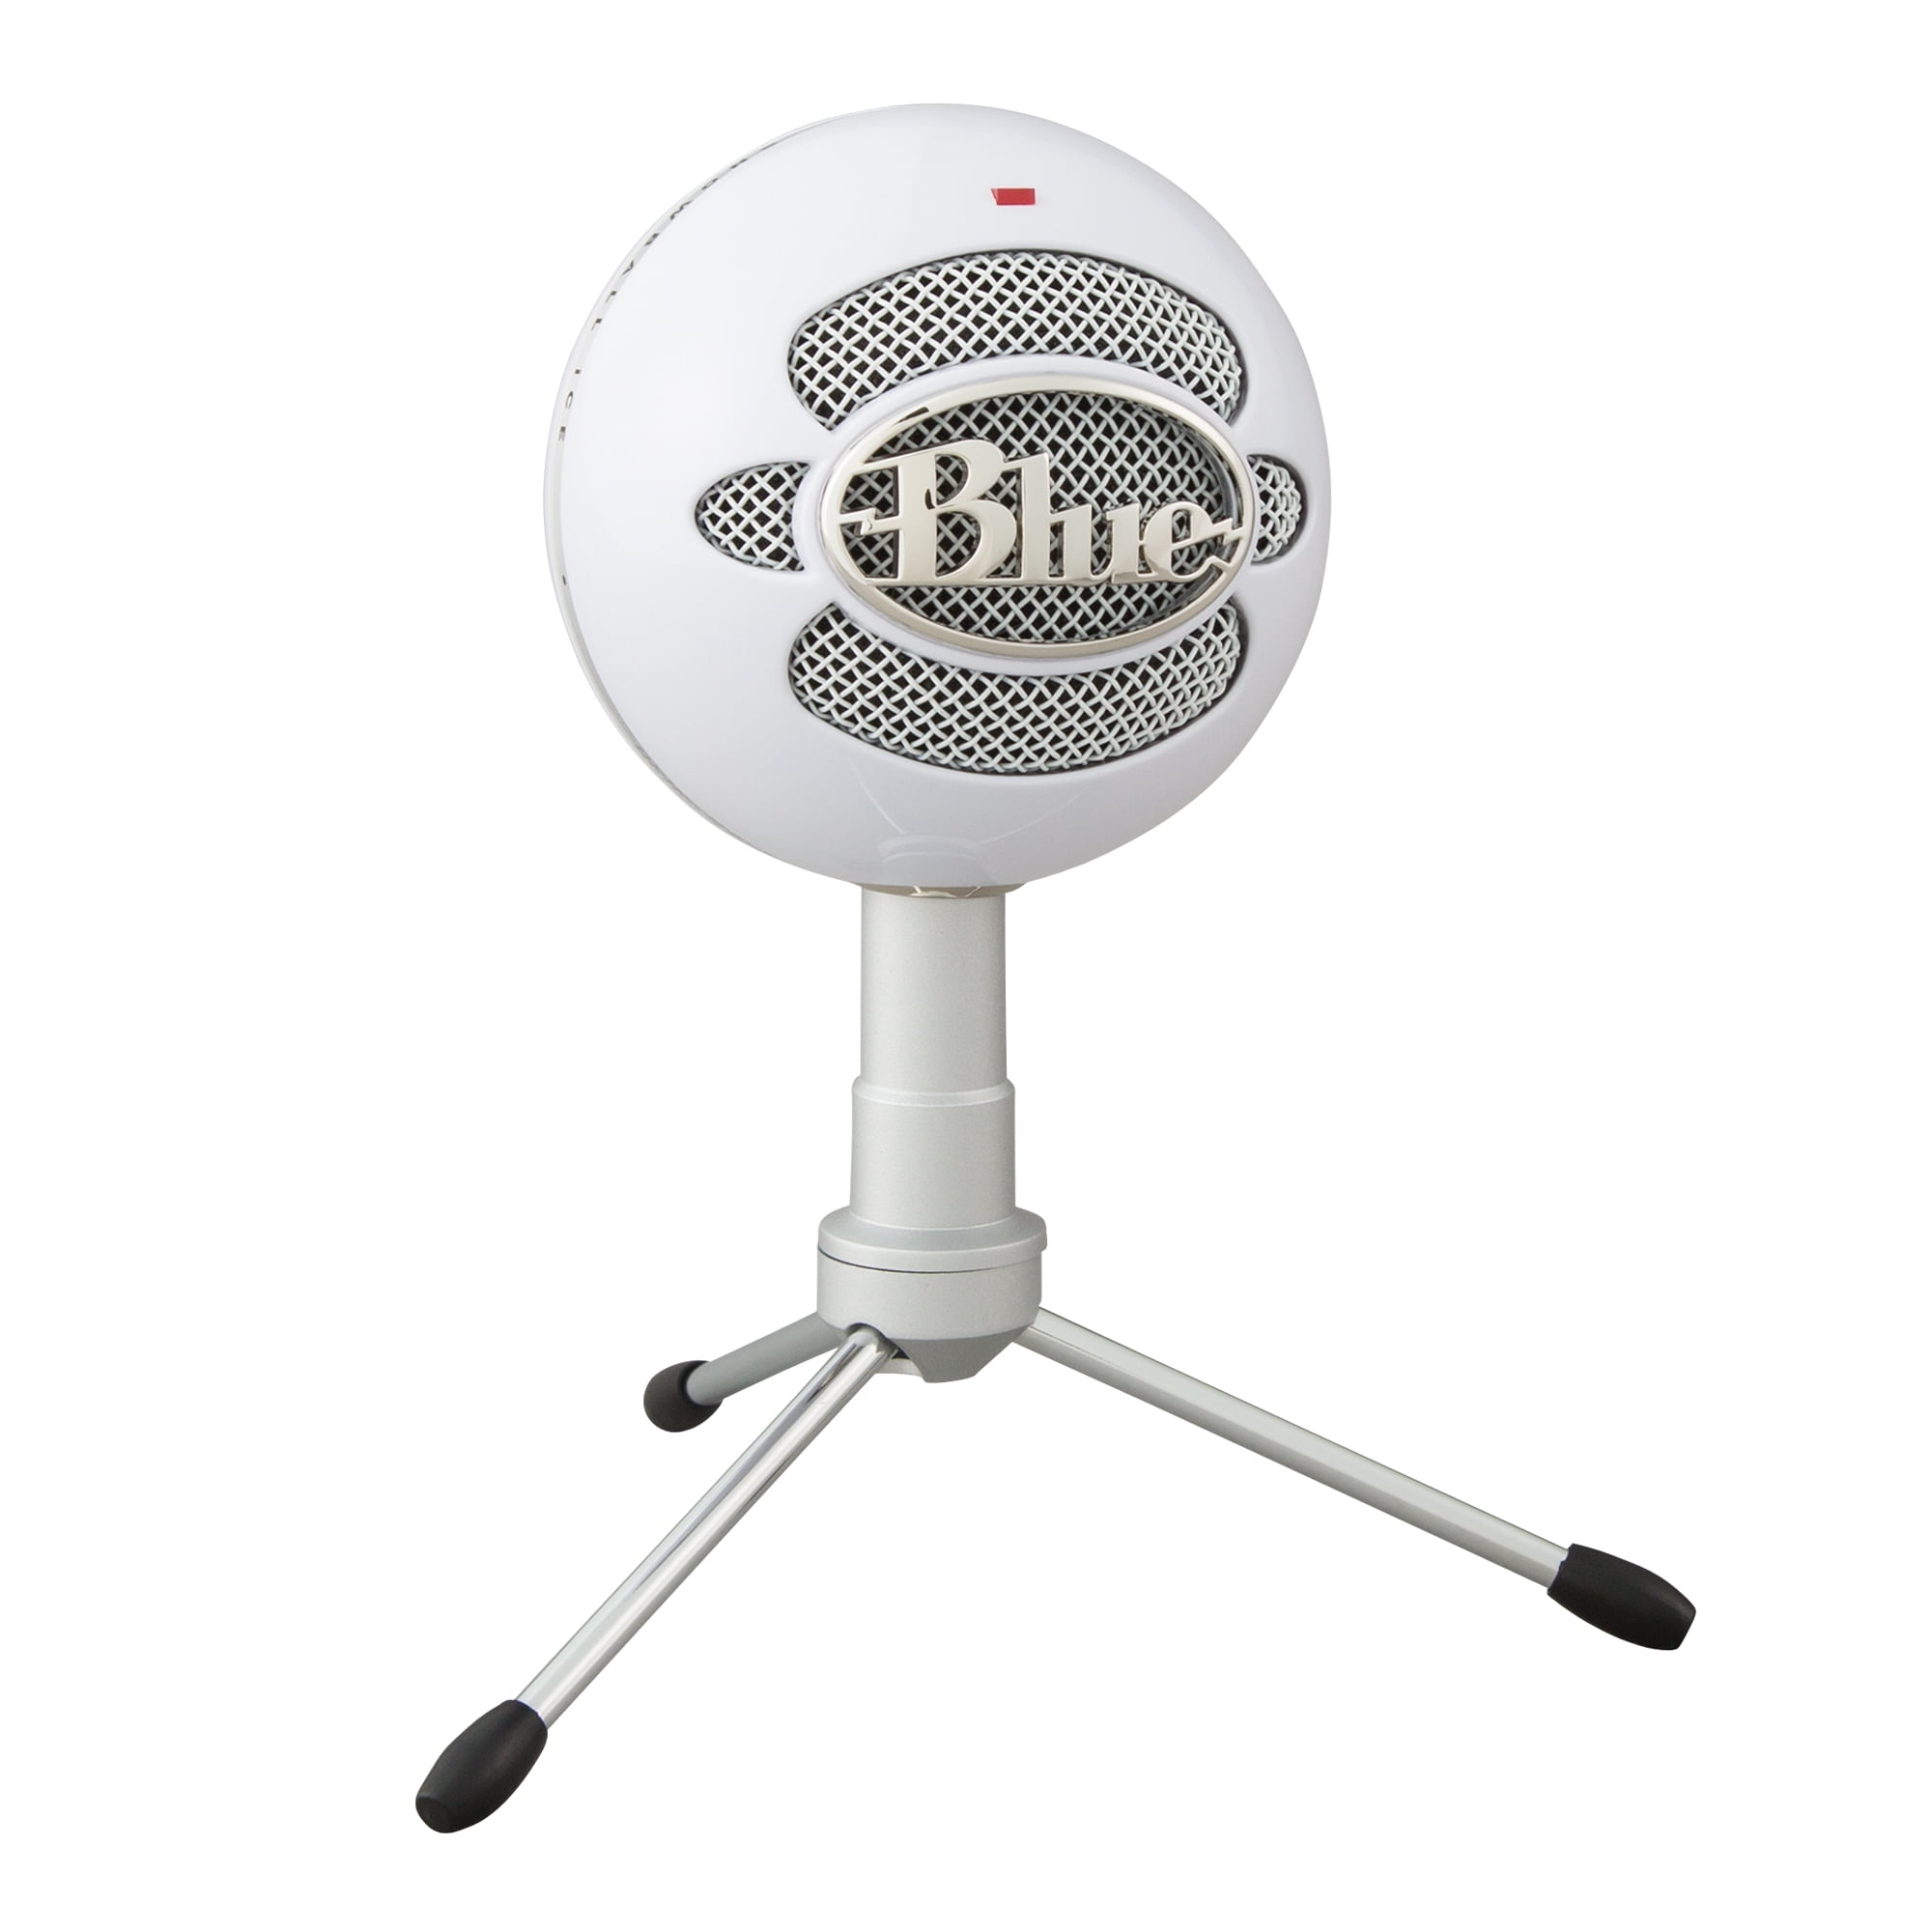 Blue Microphones Blue Snowball iCE Plug 'n Play USB Microphone for Recording, Streaming, Podcasting, Gaming on PC and Mac, with Cardioid Condenser Capsule, Adjustable Desktop Stand and USB cable, White